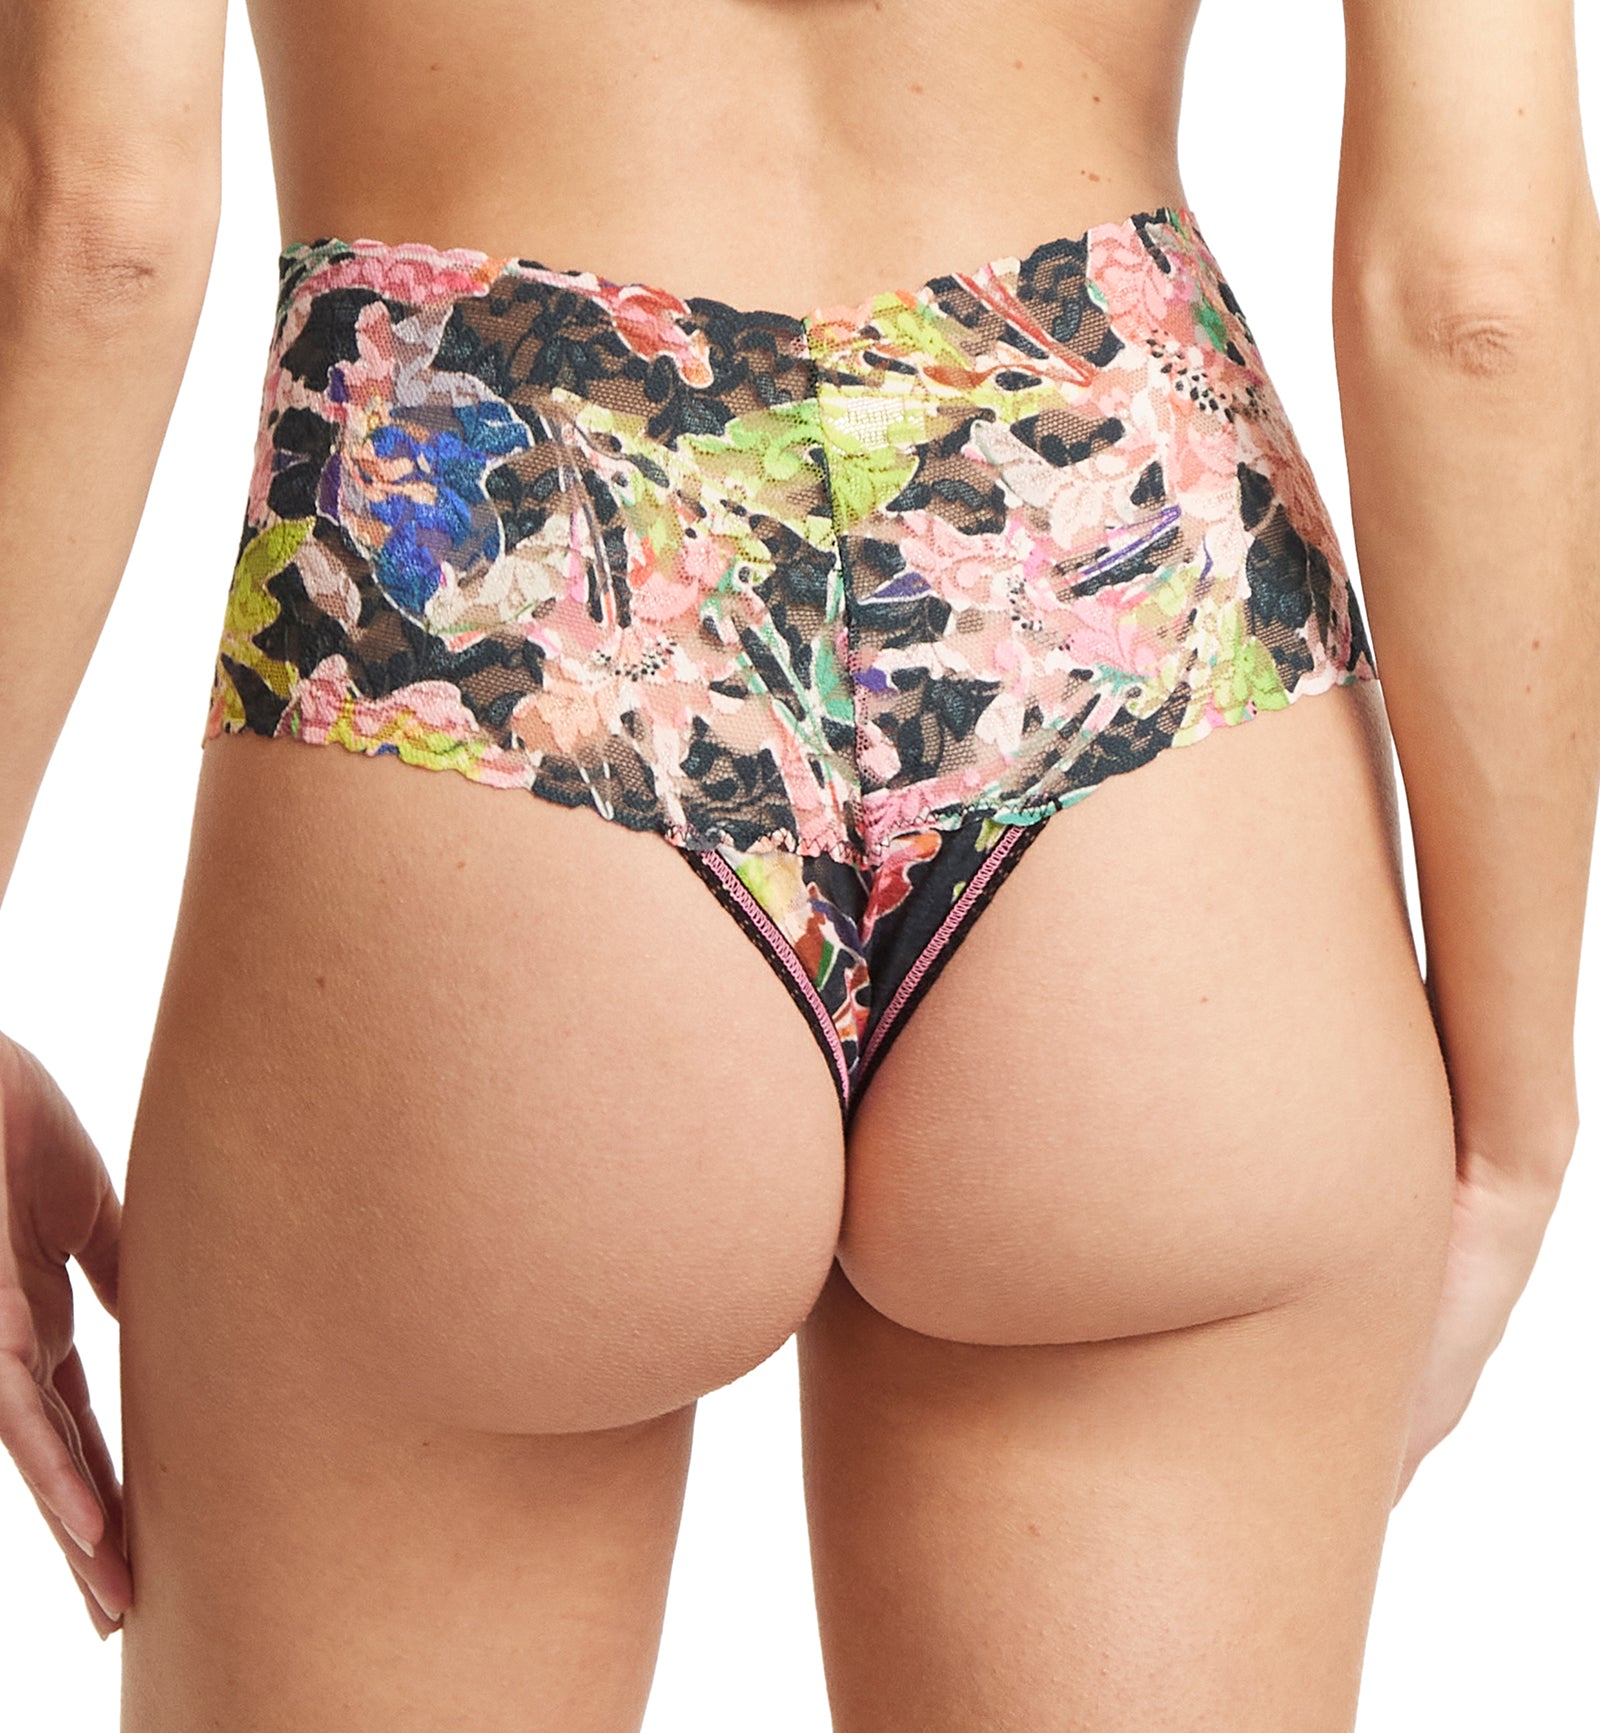 Hanky Panky High-Waist Retro Lace Printed Thong (PR9K1926),Unapologetic - Unapologetic,One Size